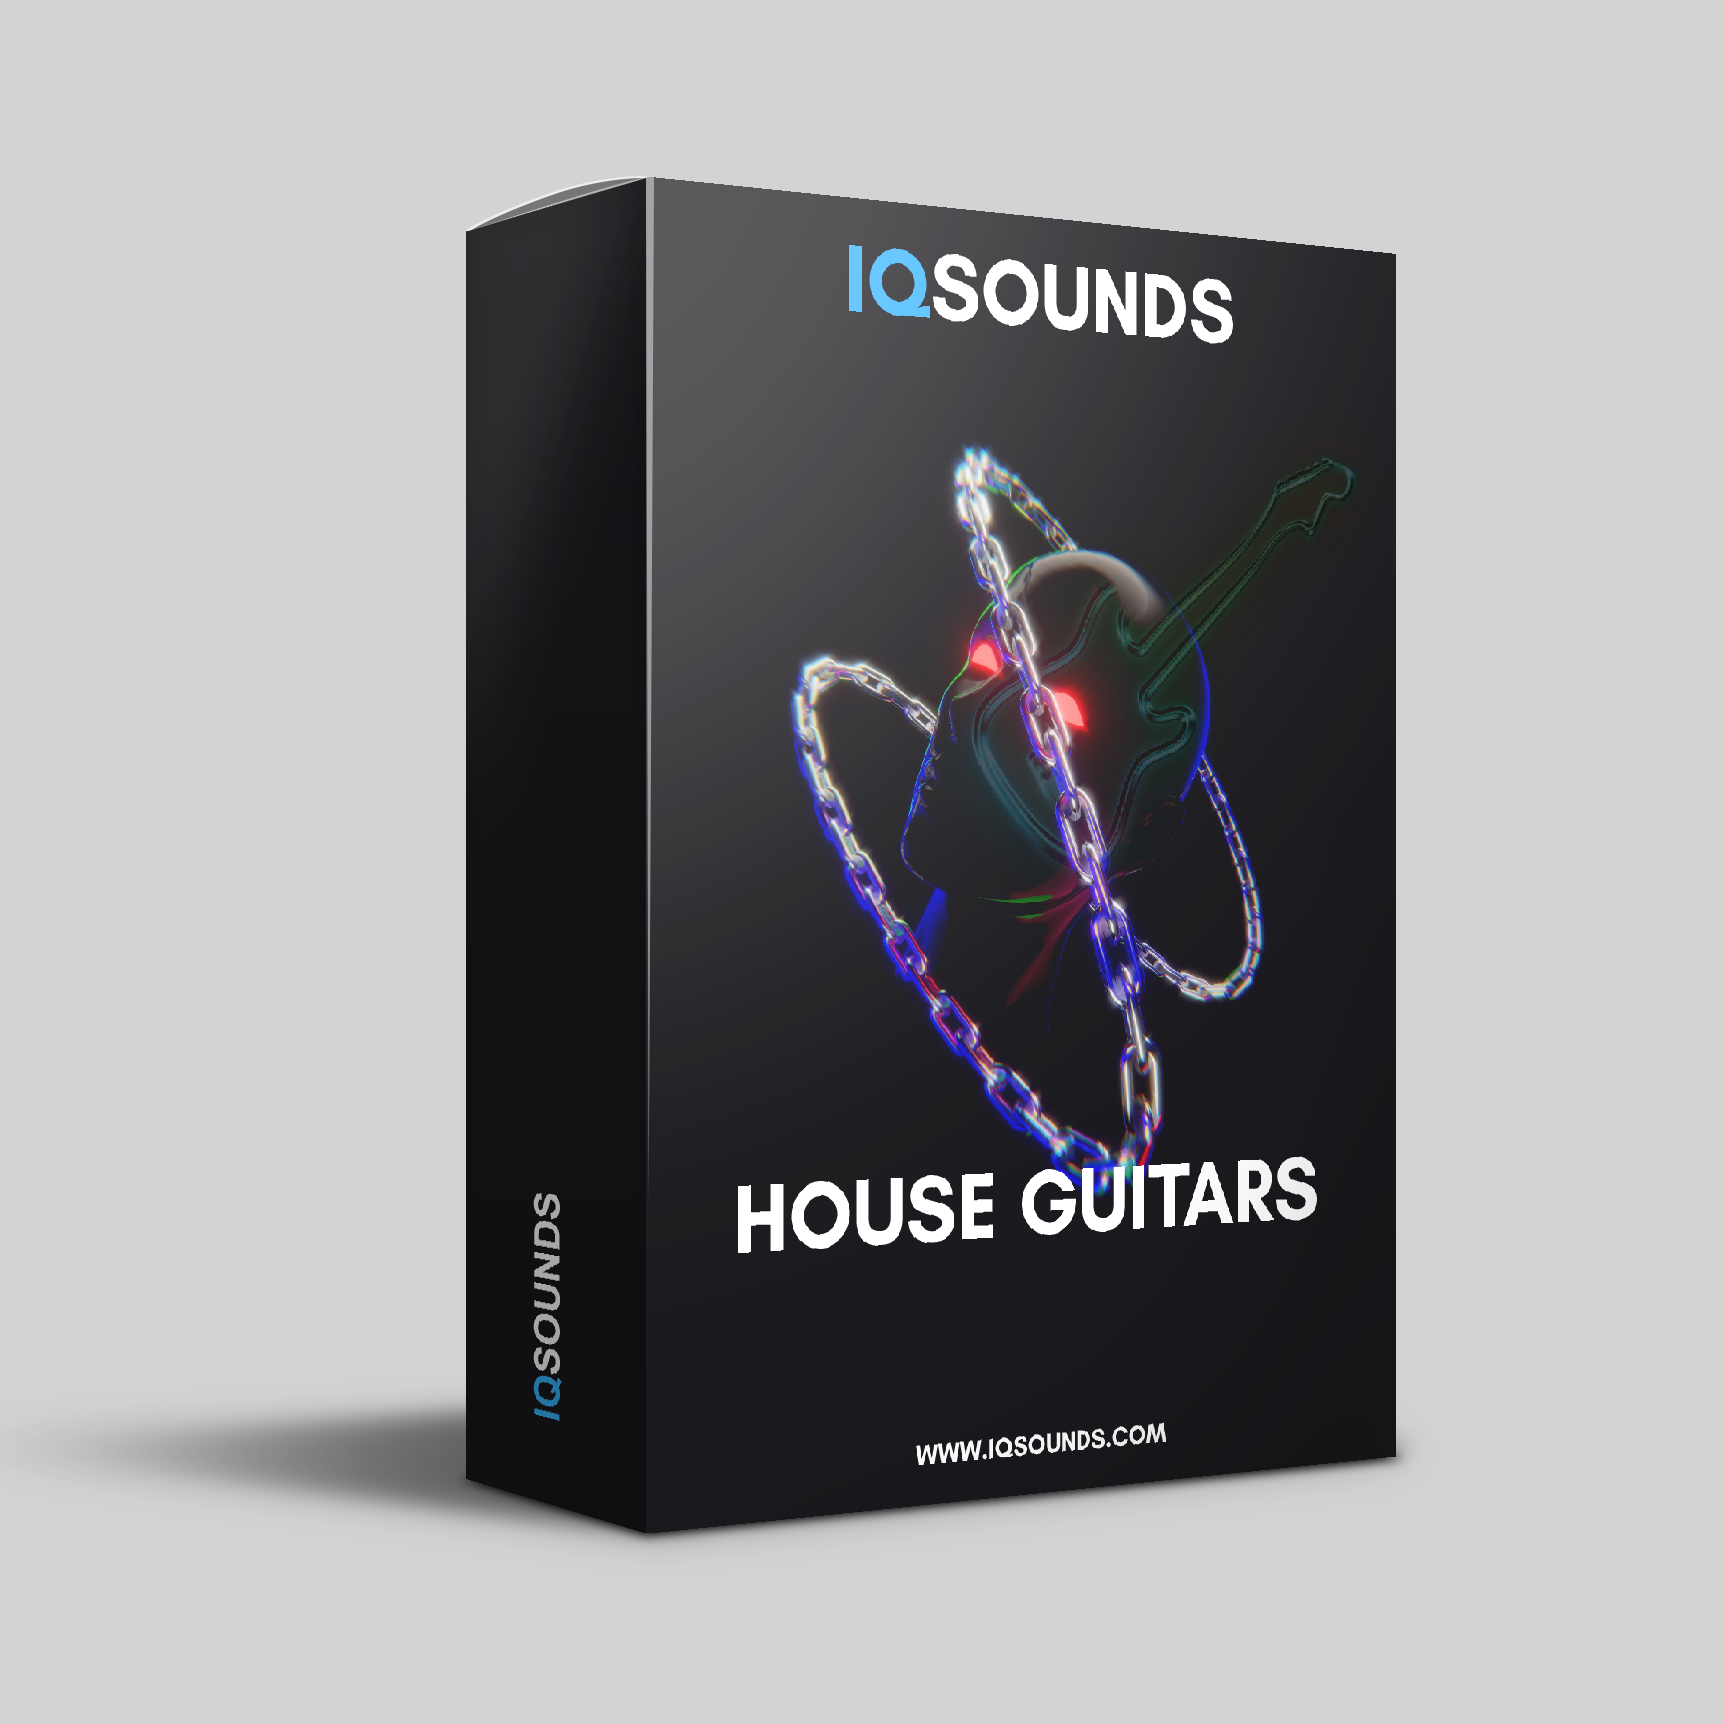 Best Guitars Sample Pack in 2022 - Only on IQSounds.com